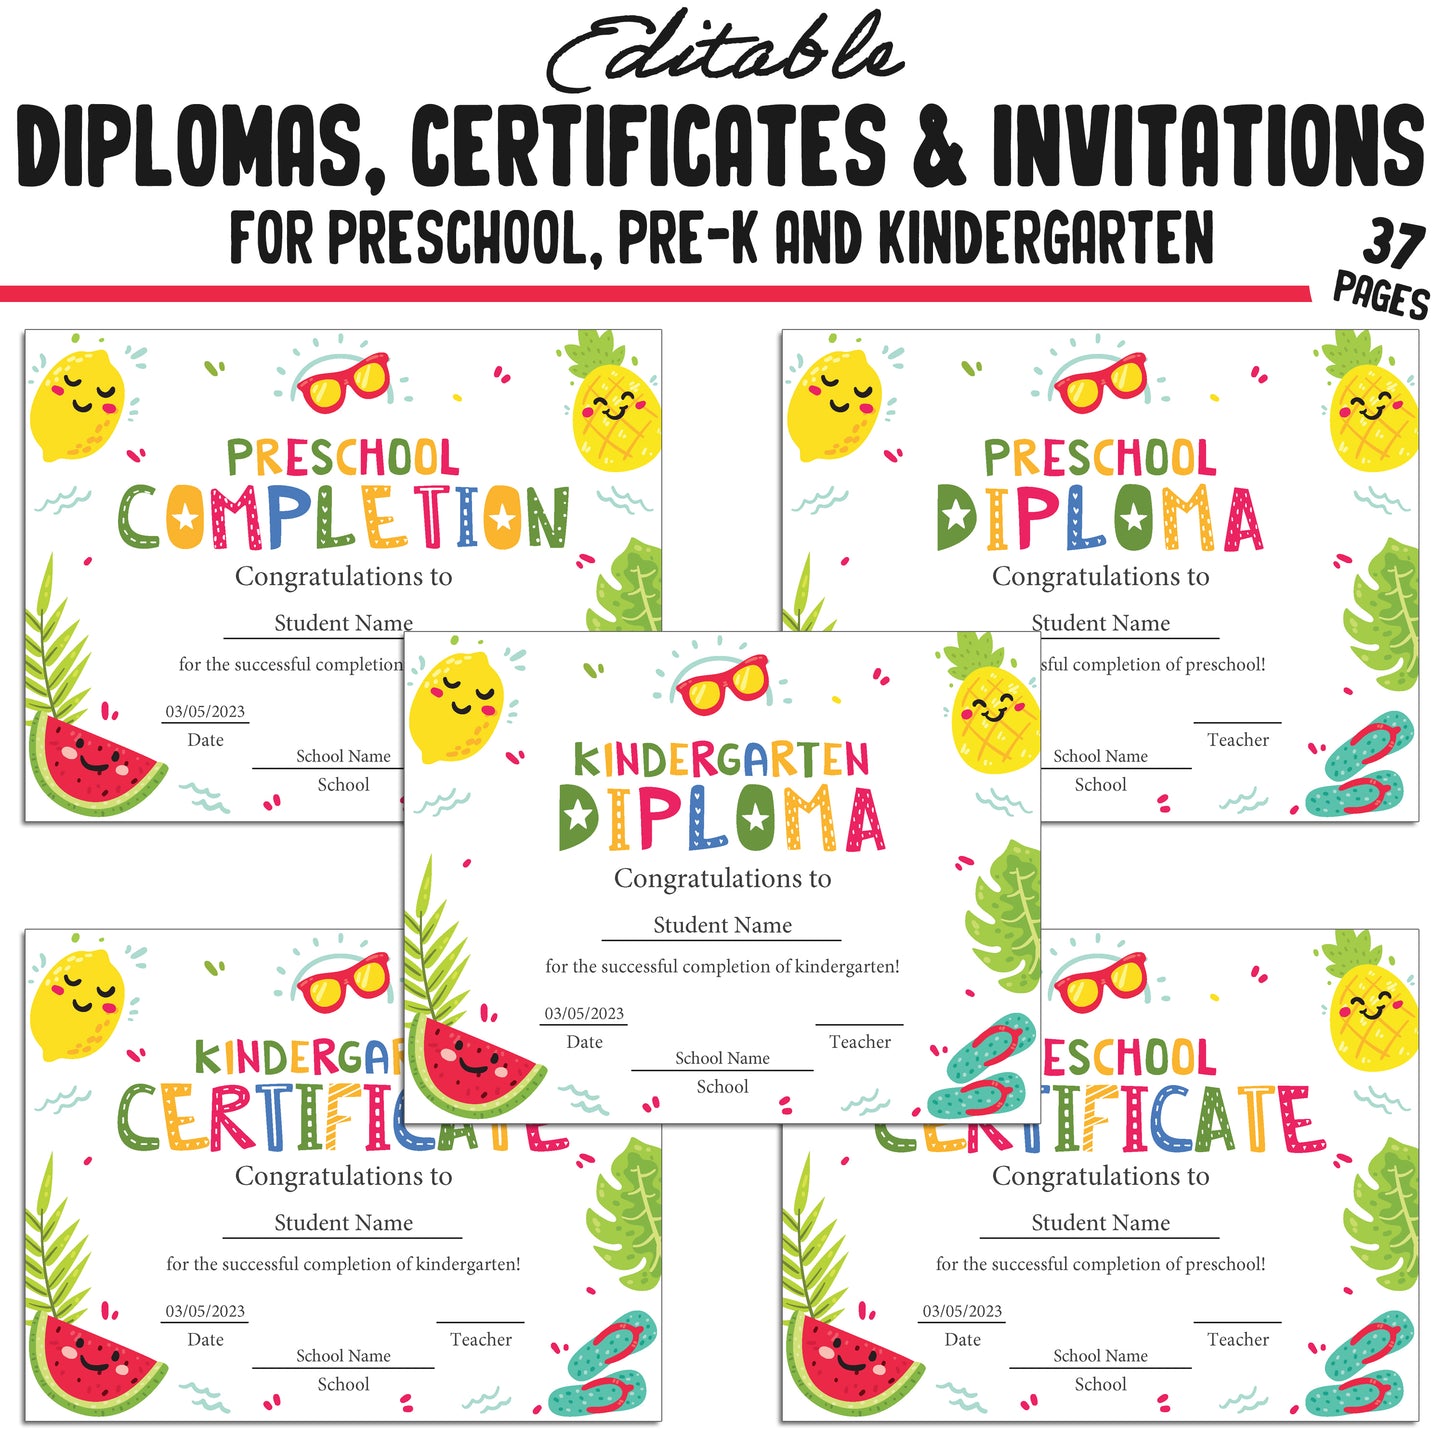 Pre-K Diploma Designs, Kindergarten and Preschool Certificates, and Invitation Templates (PDF Files) - 37 Pages, Instant Download